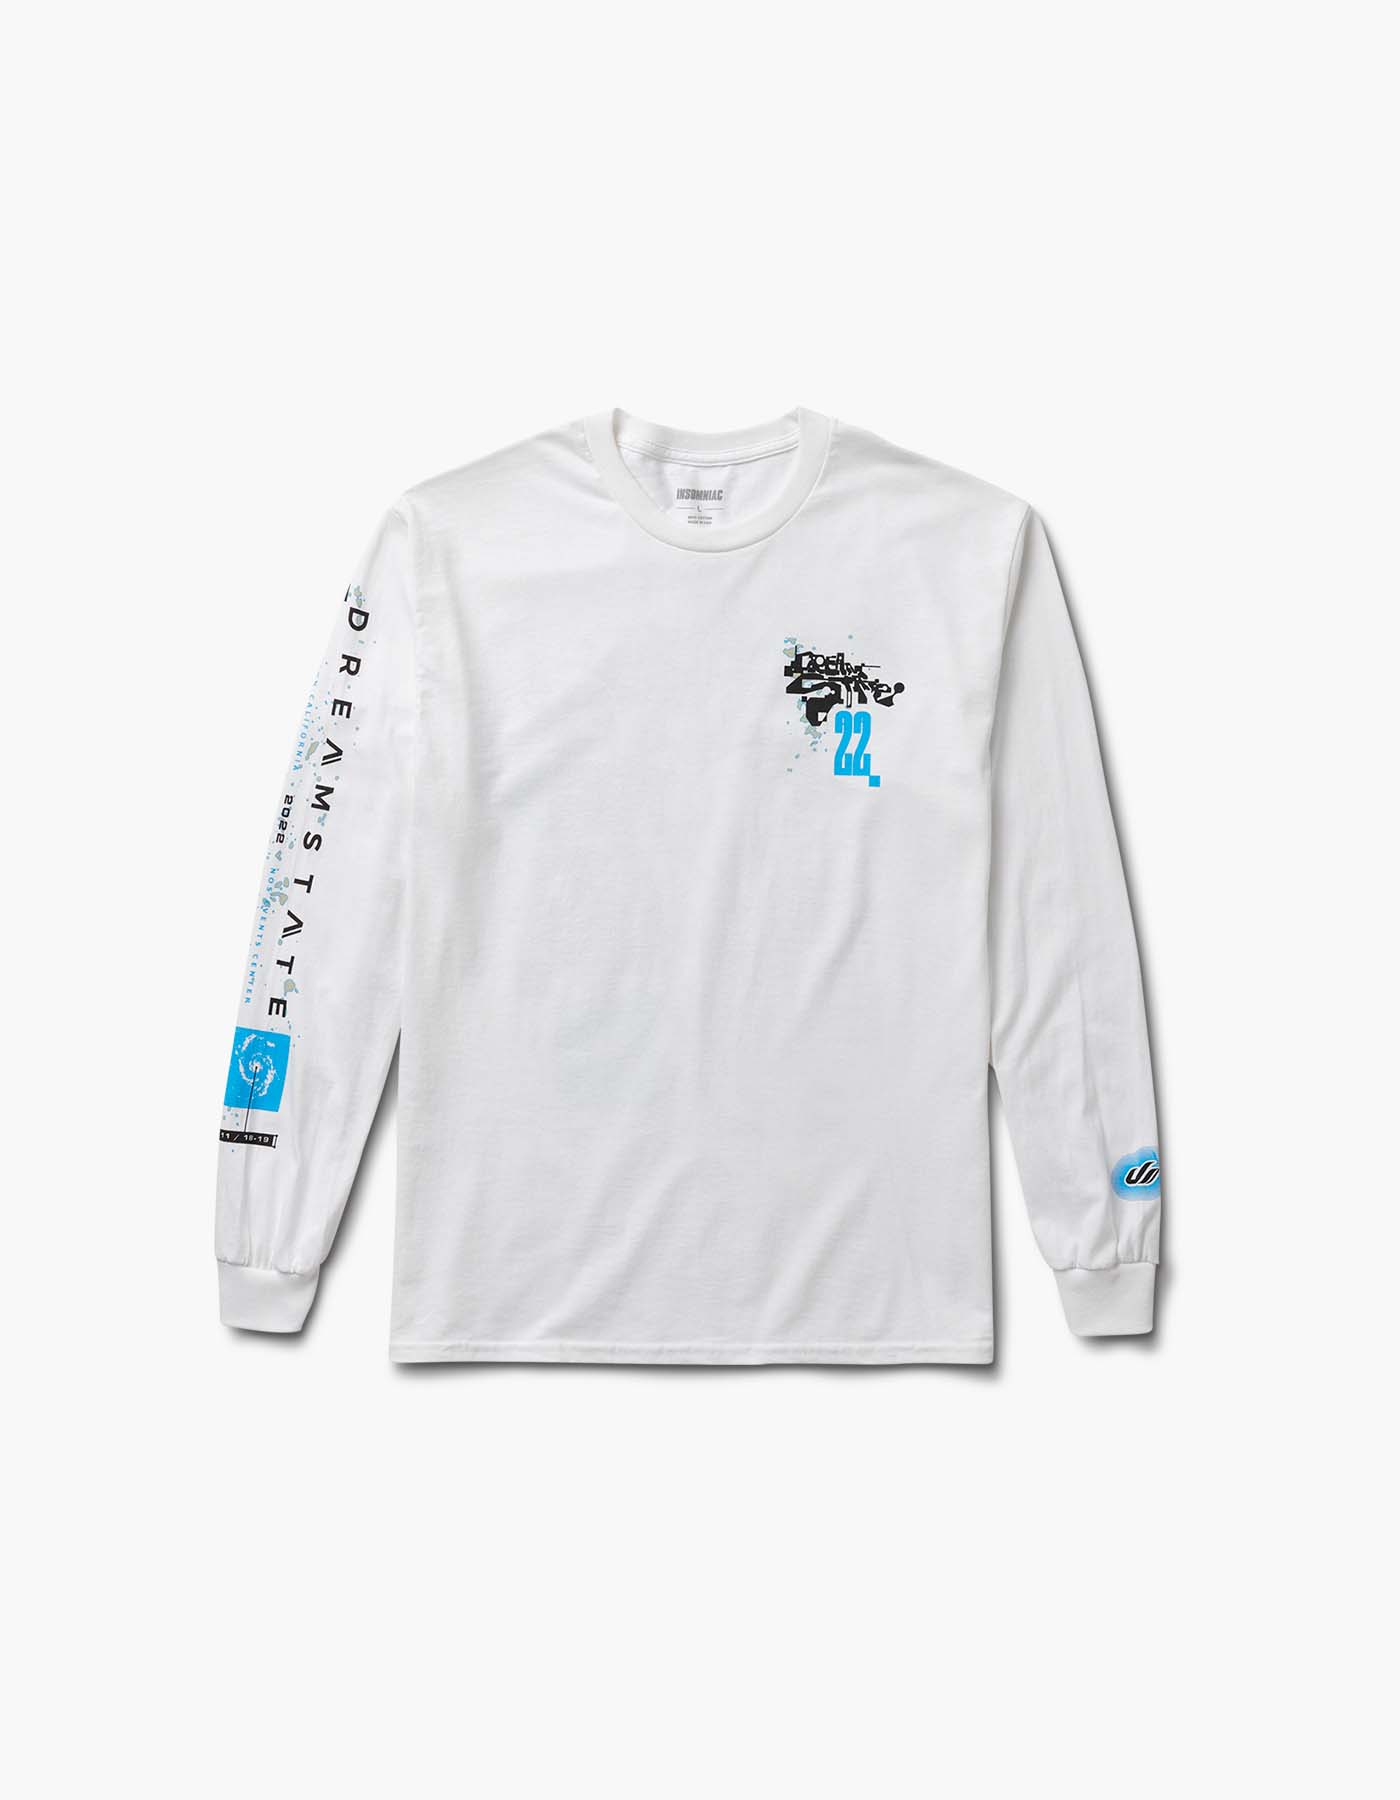 Dreamstate Nation L/S Lineup Tee